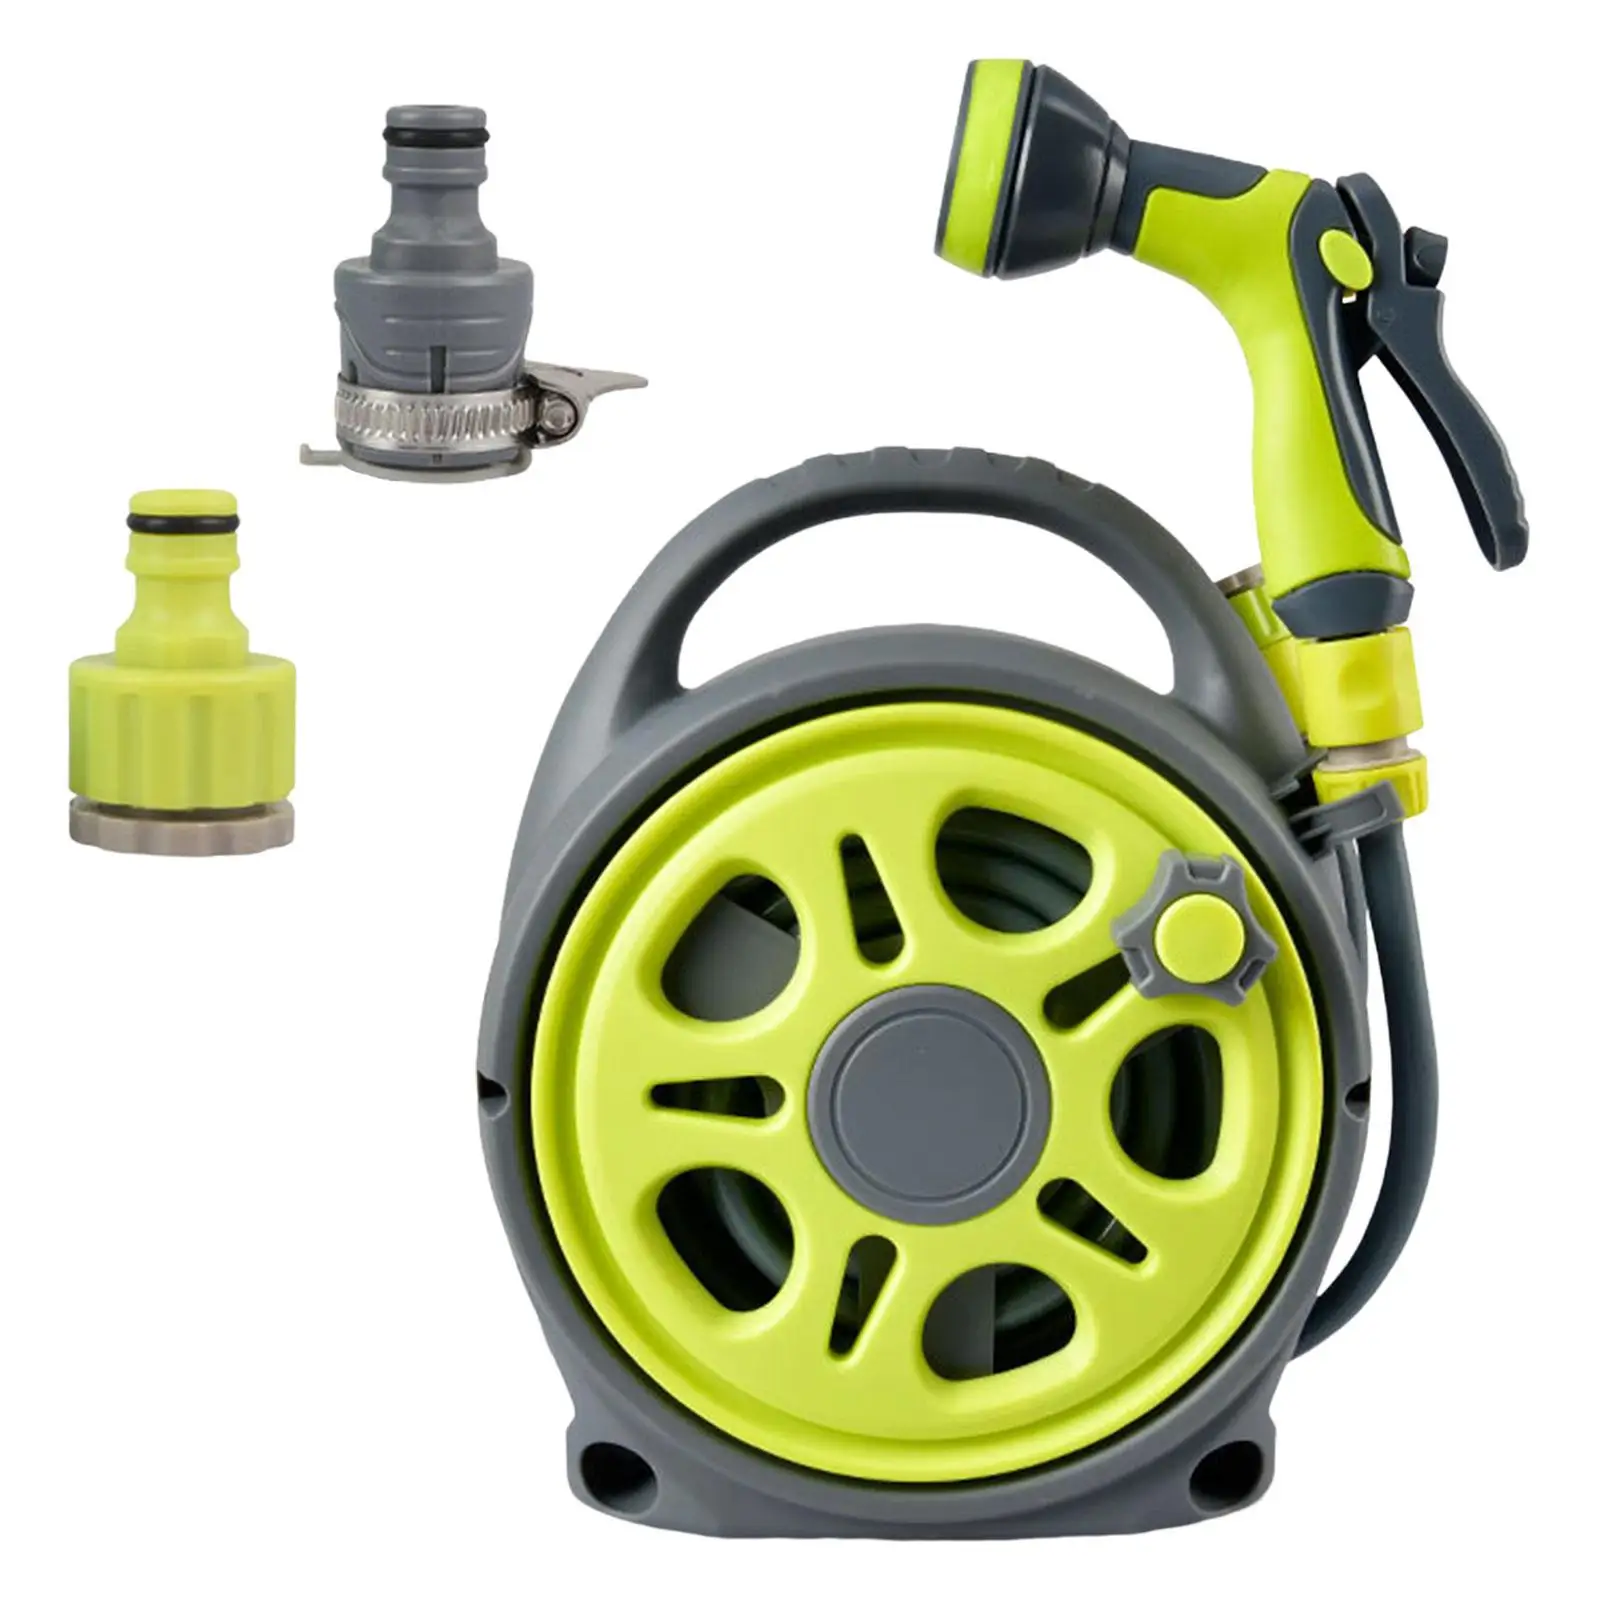 Portable Garden Hose Reel 7 Function Nozzle Heavy Duty 16M for Cleaning